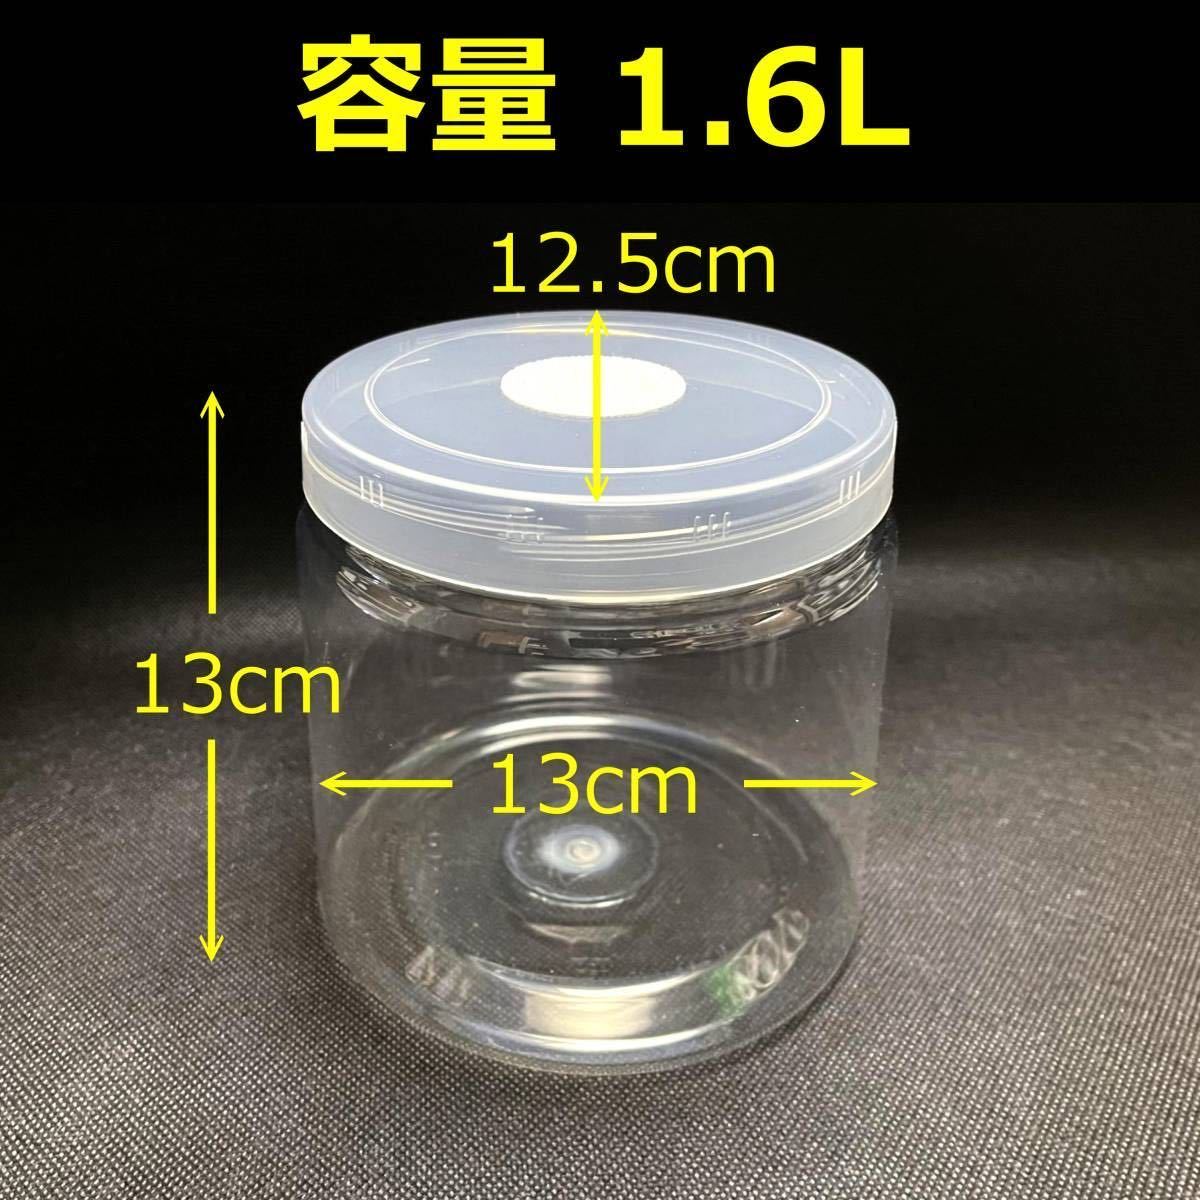 [RK] breeding case clear bottle 1600 (1600cc) new goods 45 piece extra attaching domestic production foreign product rhinoceros beetle stag beetle larva breeding optimum label seal attaching 